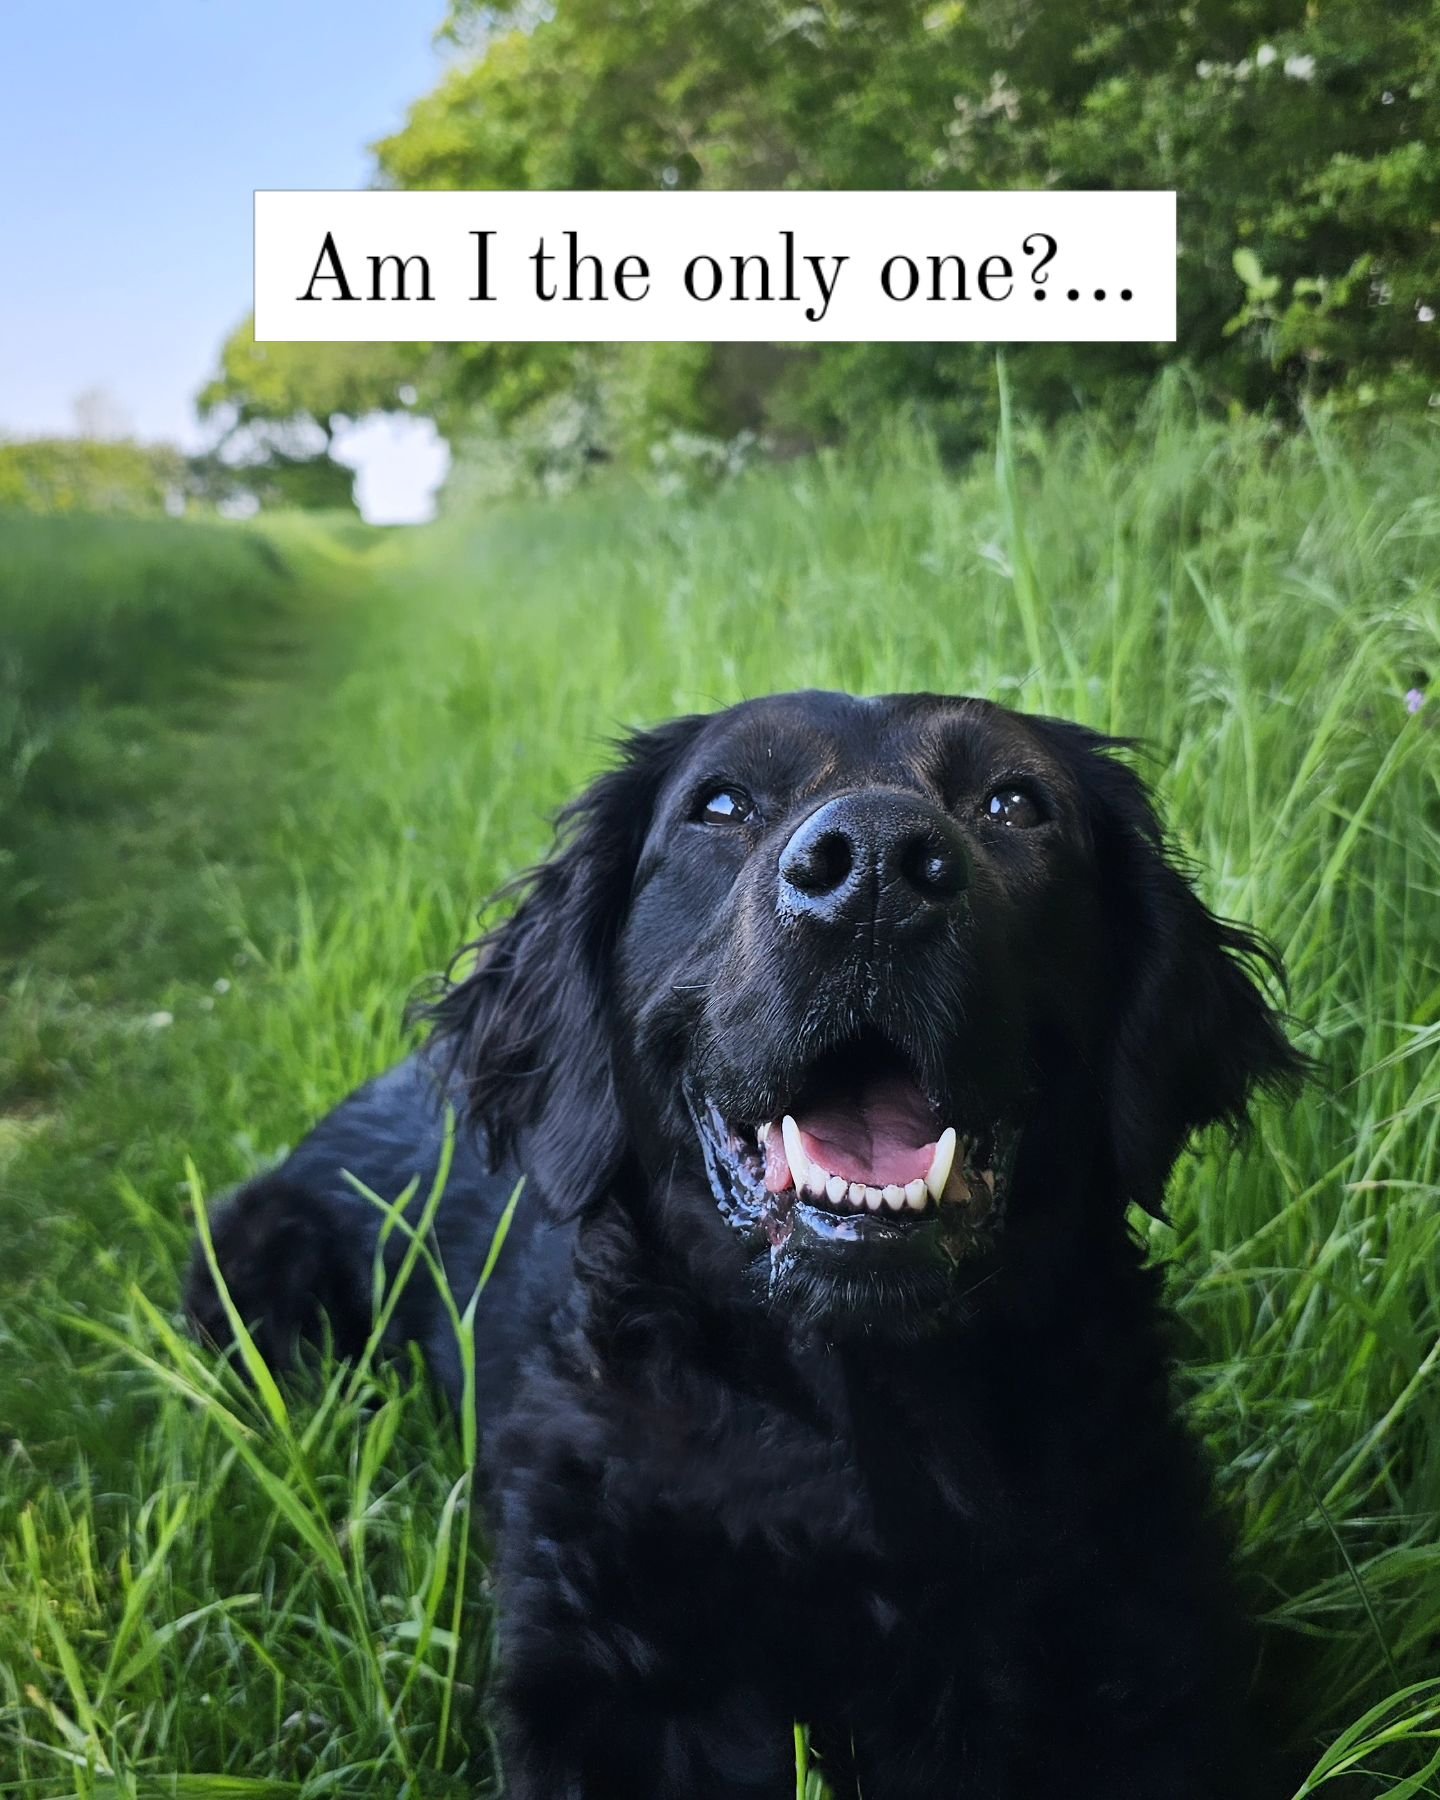 Is your dog a flatcoat? That is the question. 

As in, that is the question I get asked pretty much every day. So someone tell me, what is it about her maybe being a flatcoat that makes EVERYONE ask if she's a flatcoat or not? Why does that breed spa